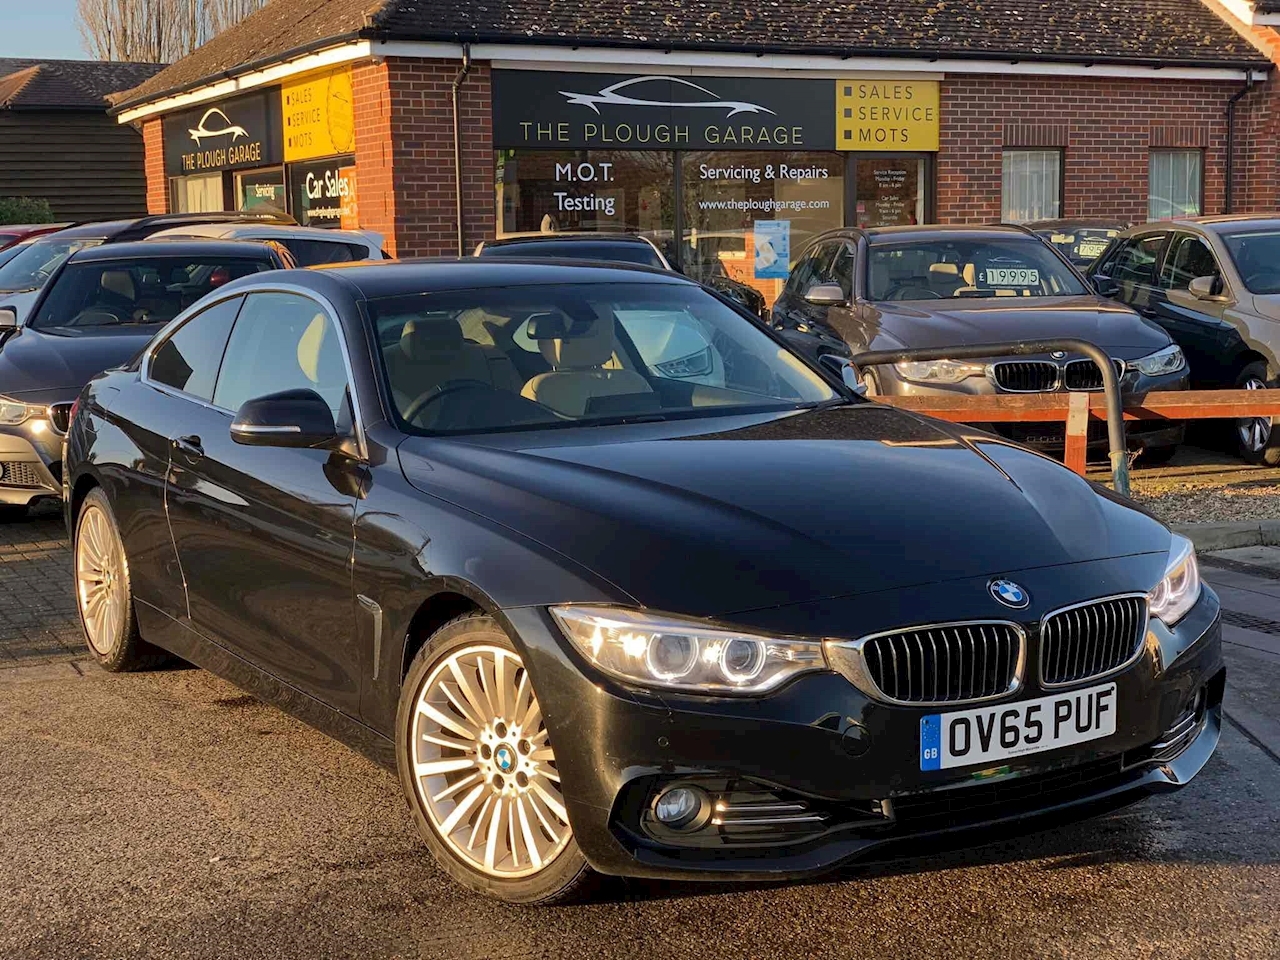 430d Luxury Coupe 3.0 Automatic Diesel